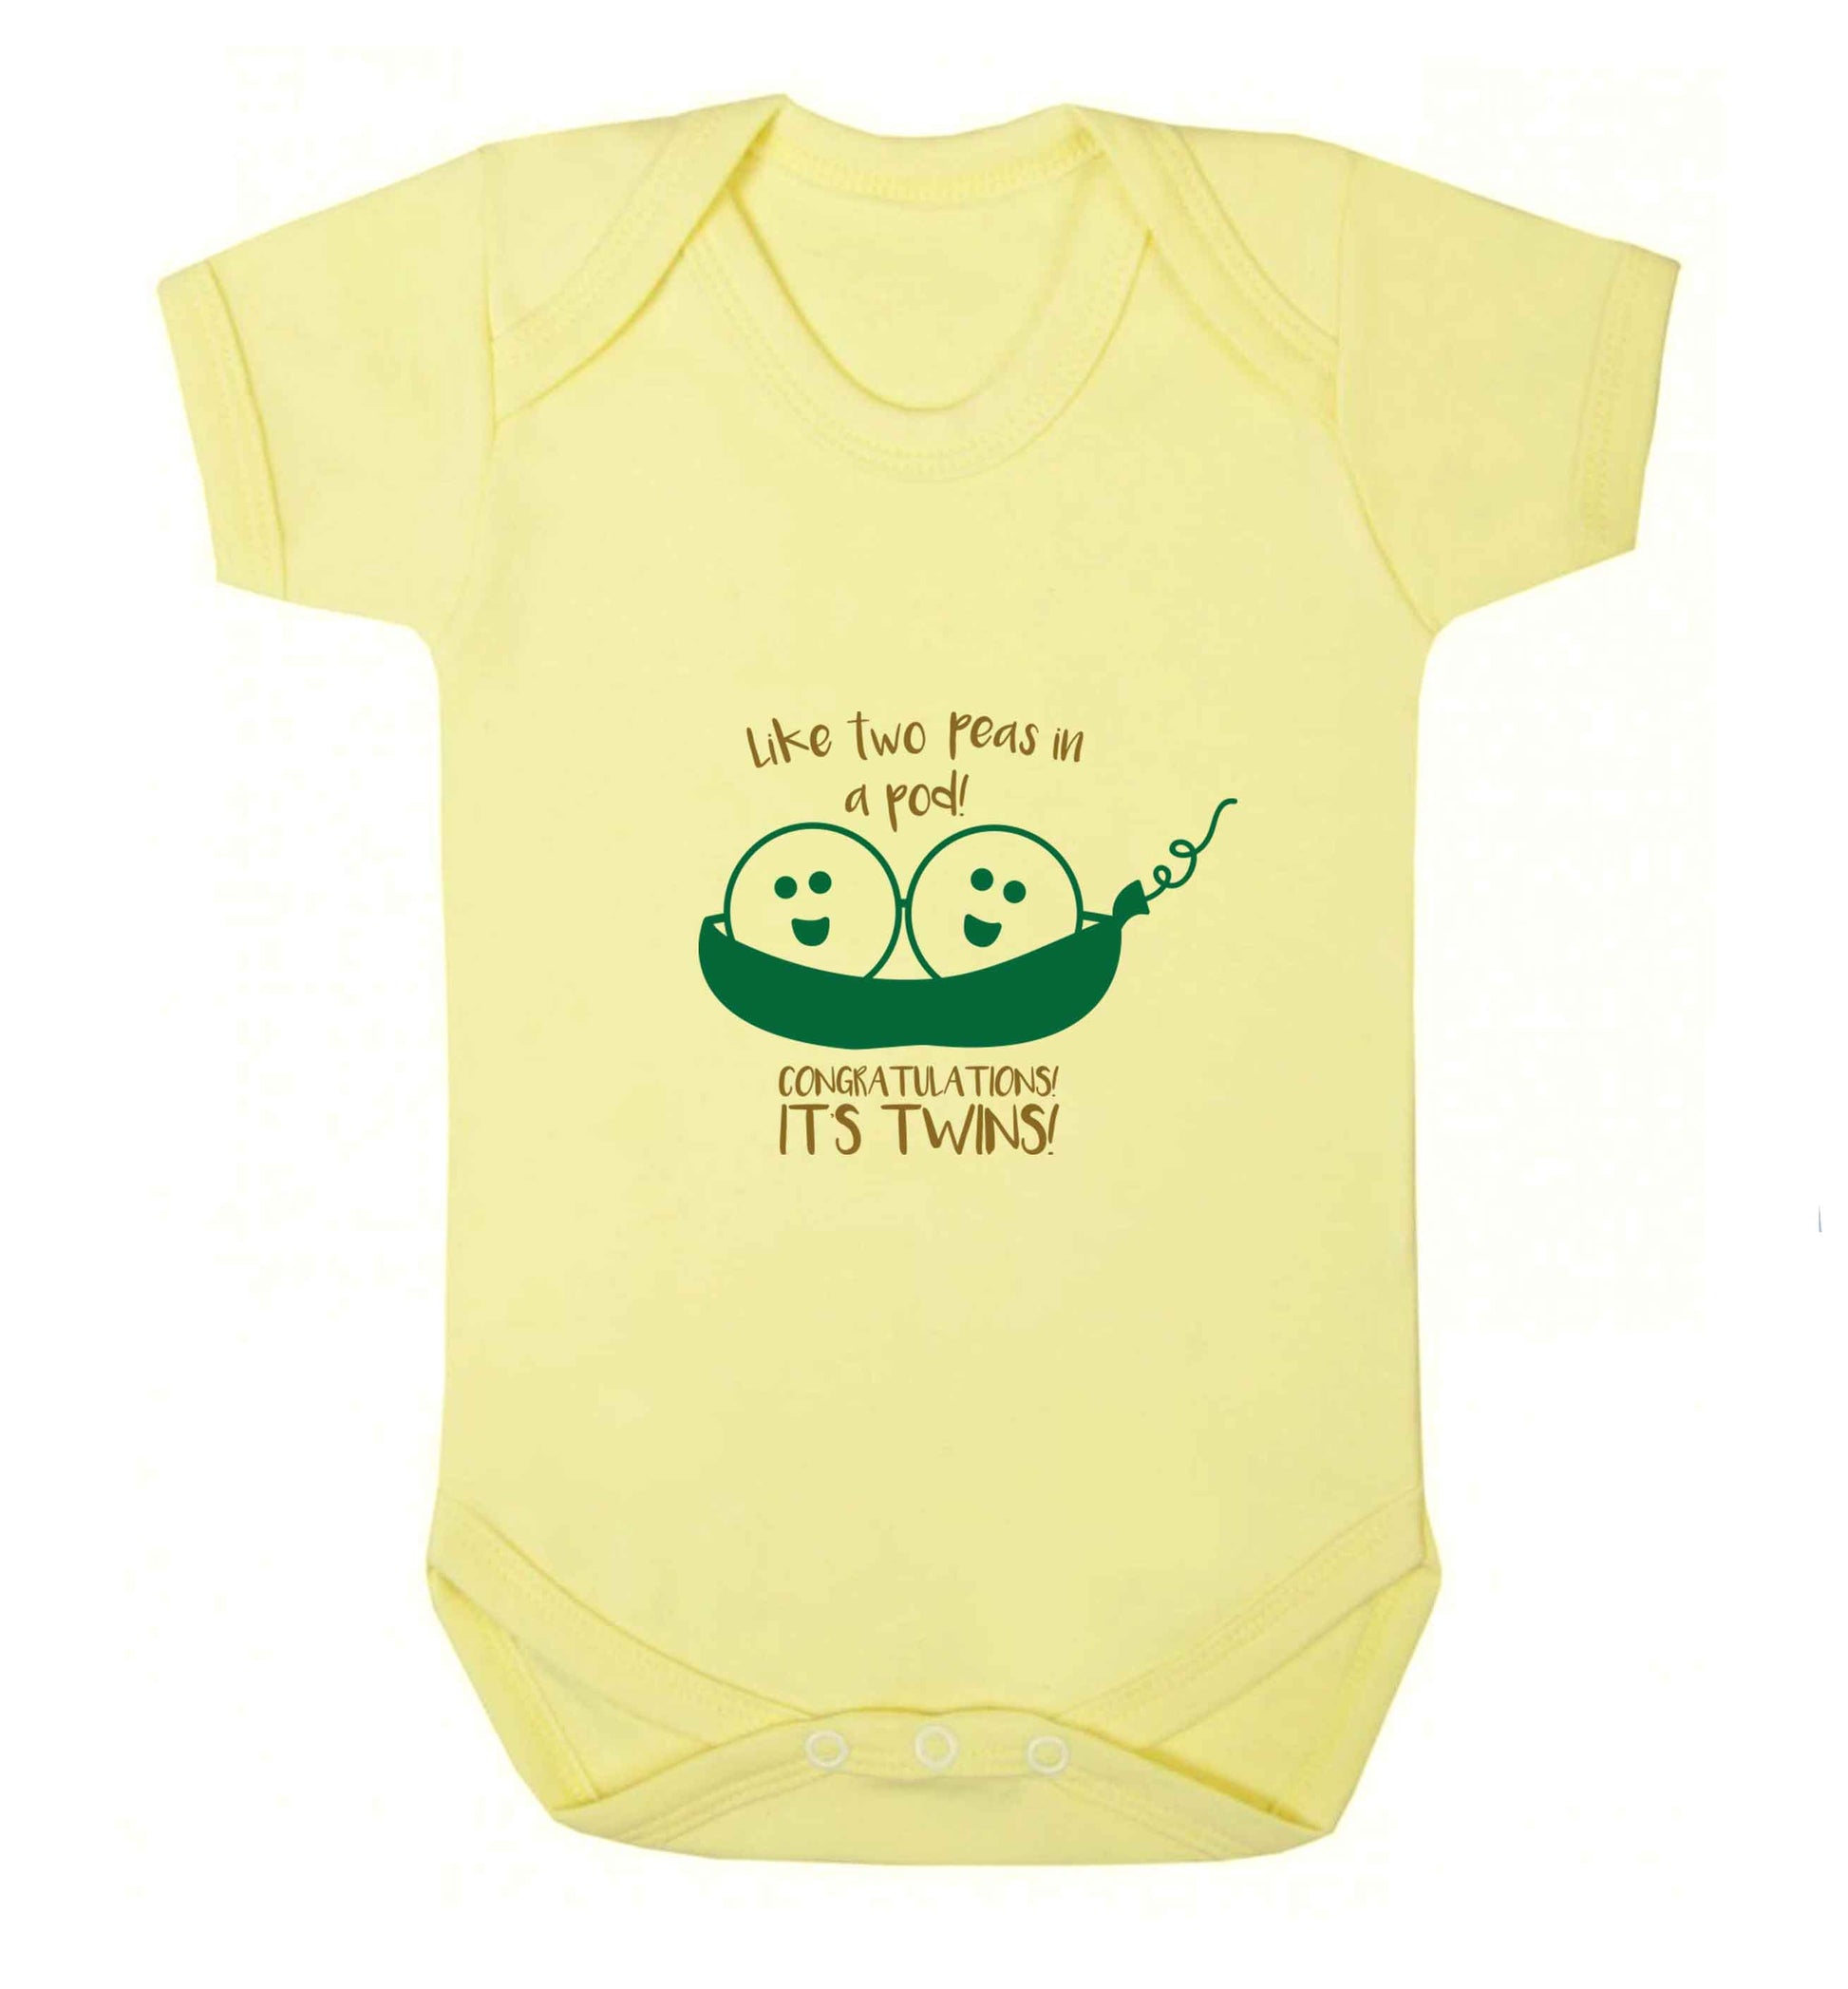 Like two peas in a pod! Congratulations it's twins! baby vest pale yellow 18-24 months